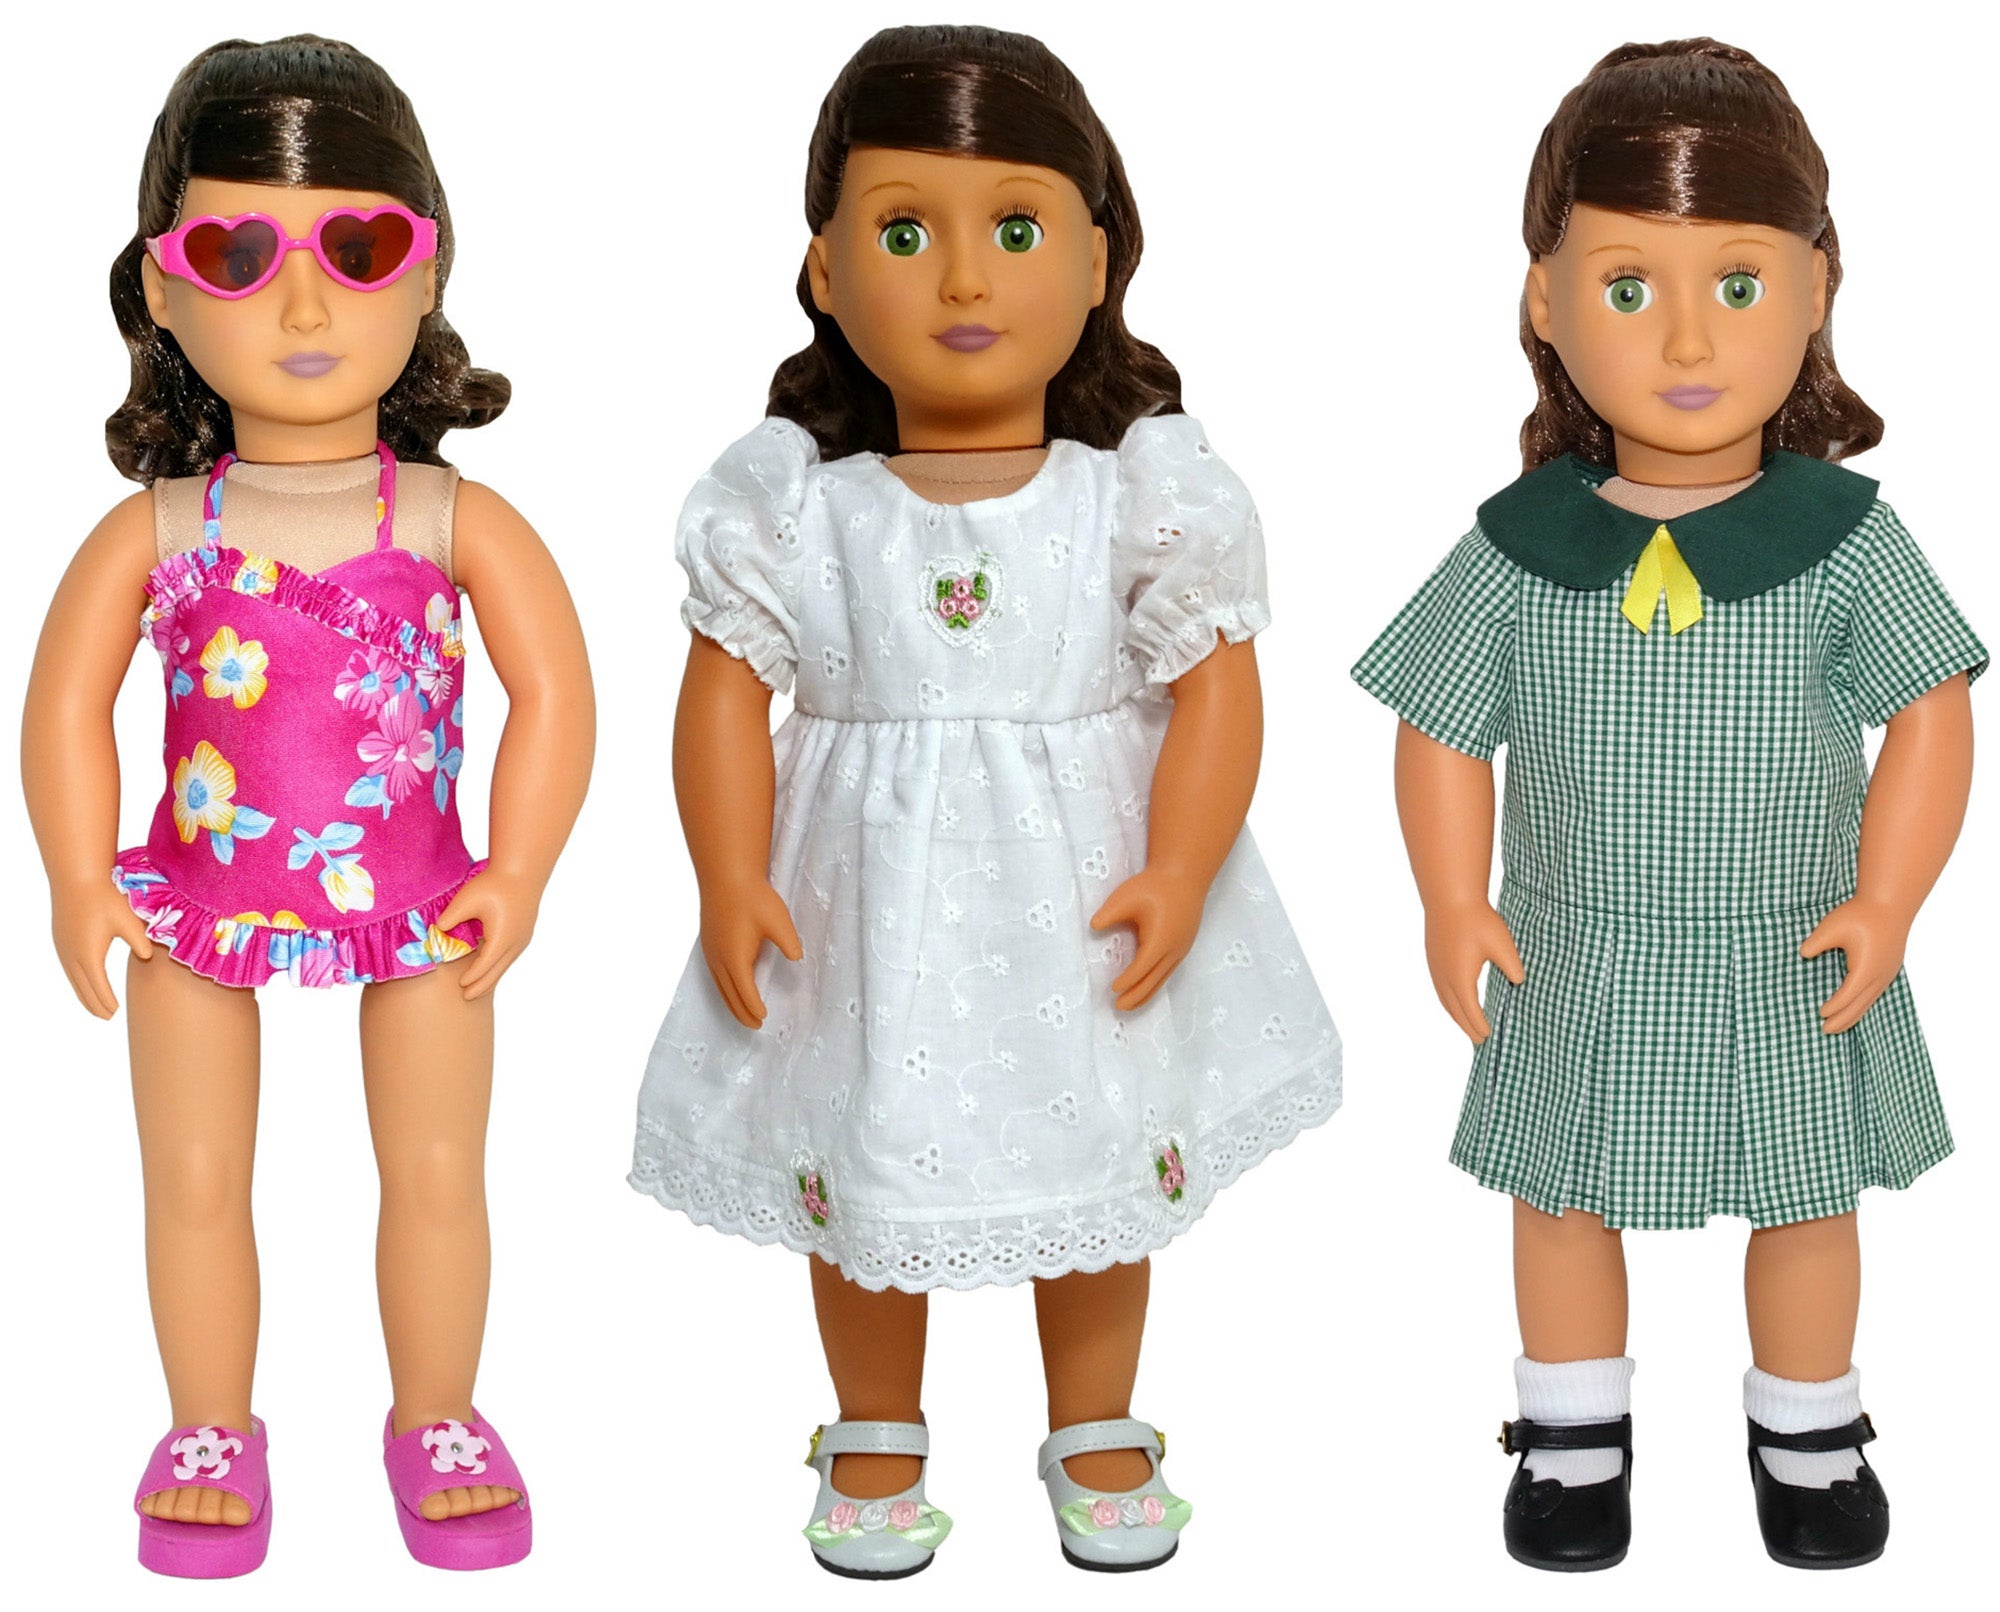 Our Generation Doll Loves Wearing American Girl Doll Clothes & Shoes